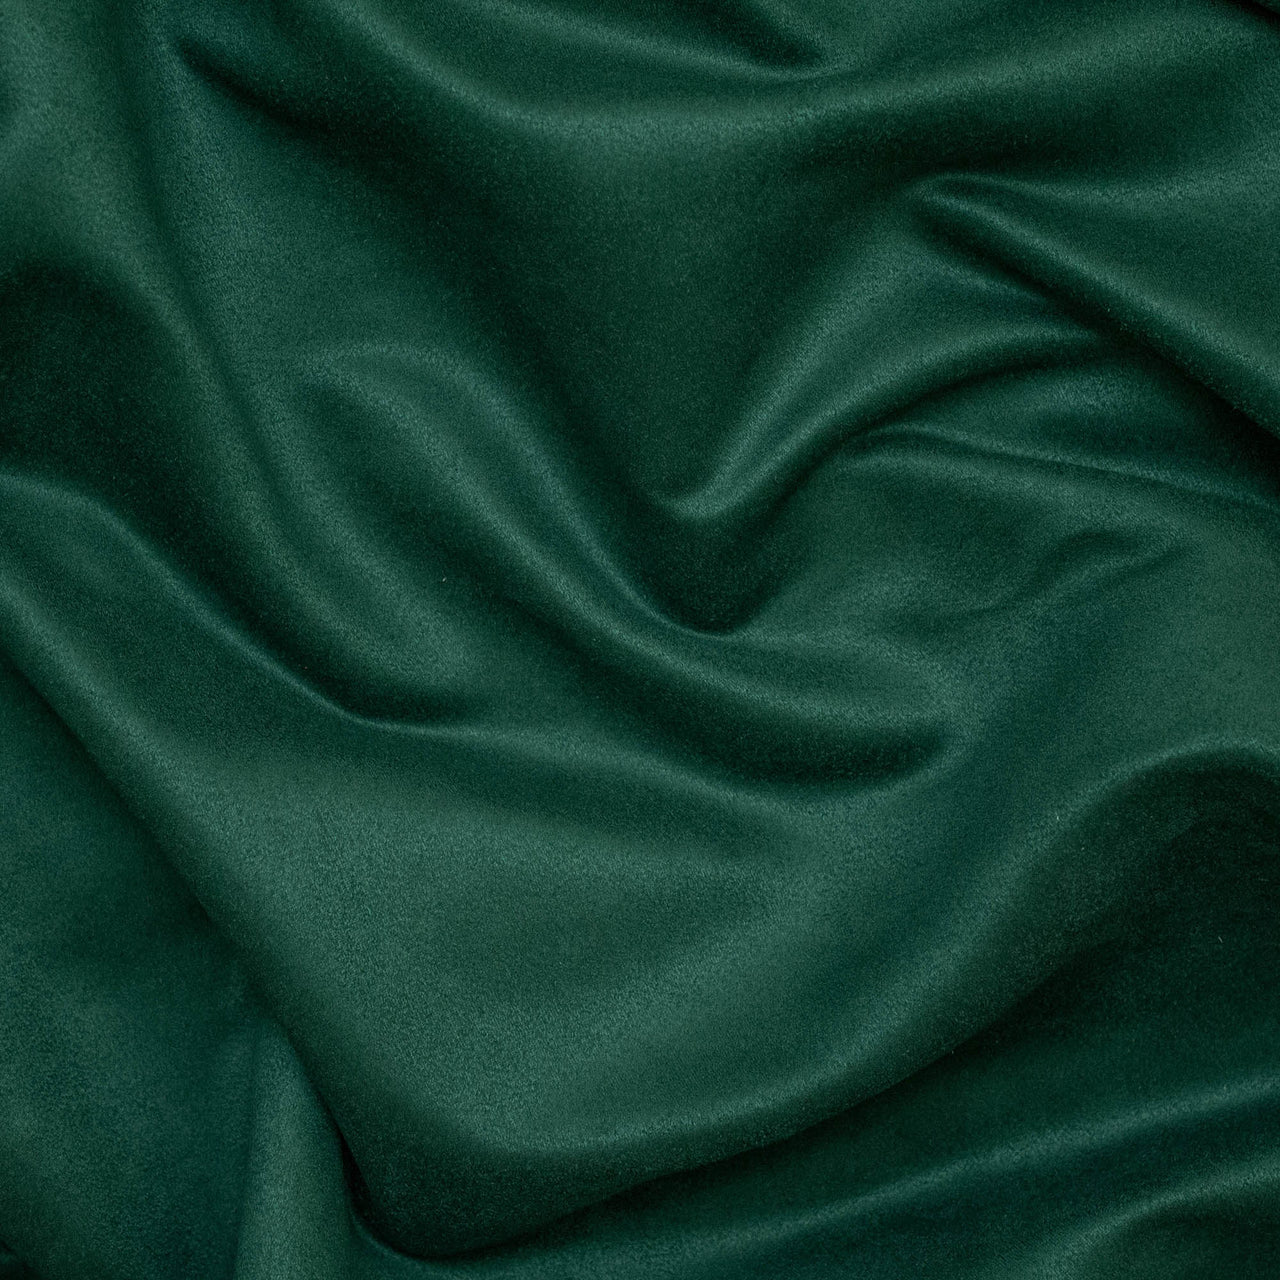 Bottle Green - Premium Faux Suede for Car Interior, Interior Design, Upholstery & Soft Furnishings